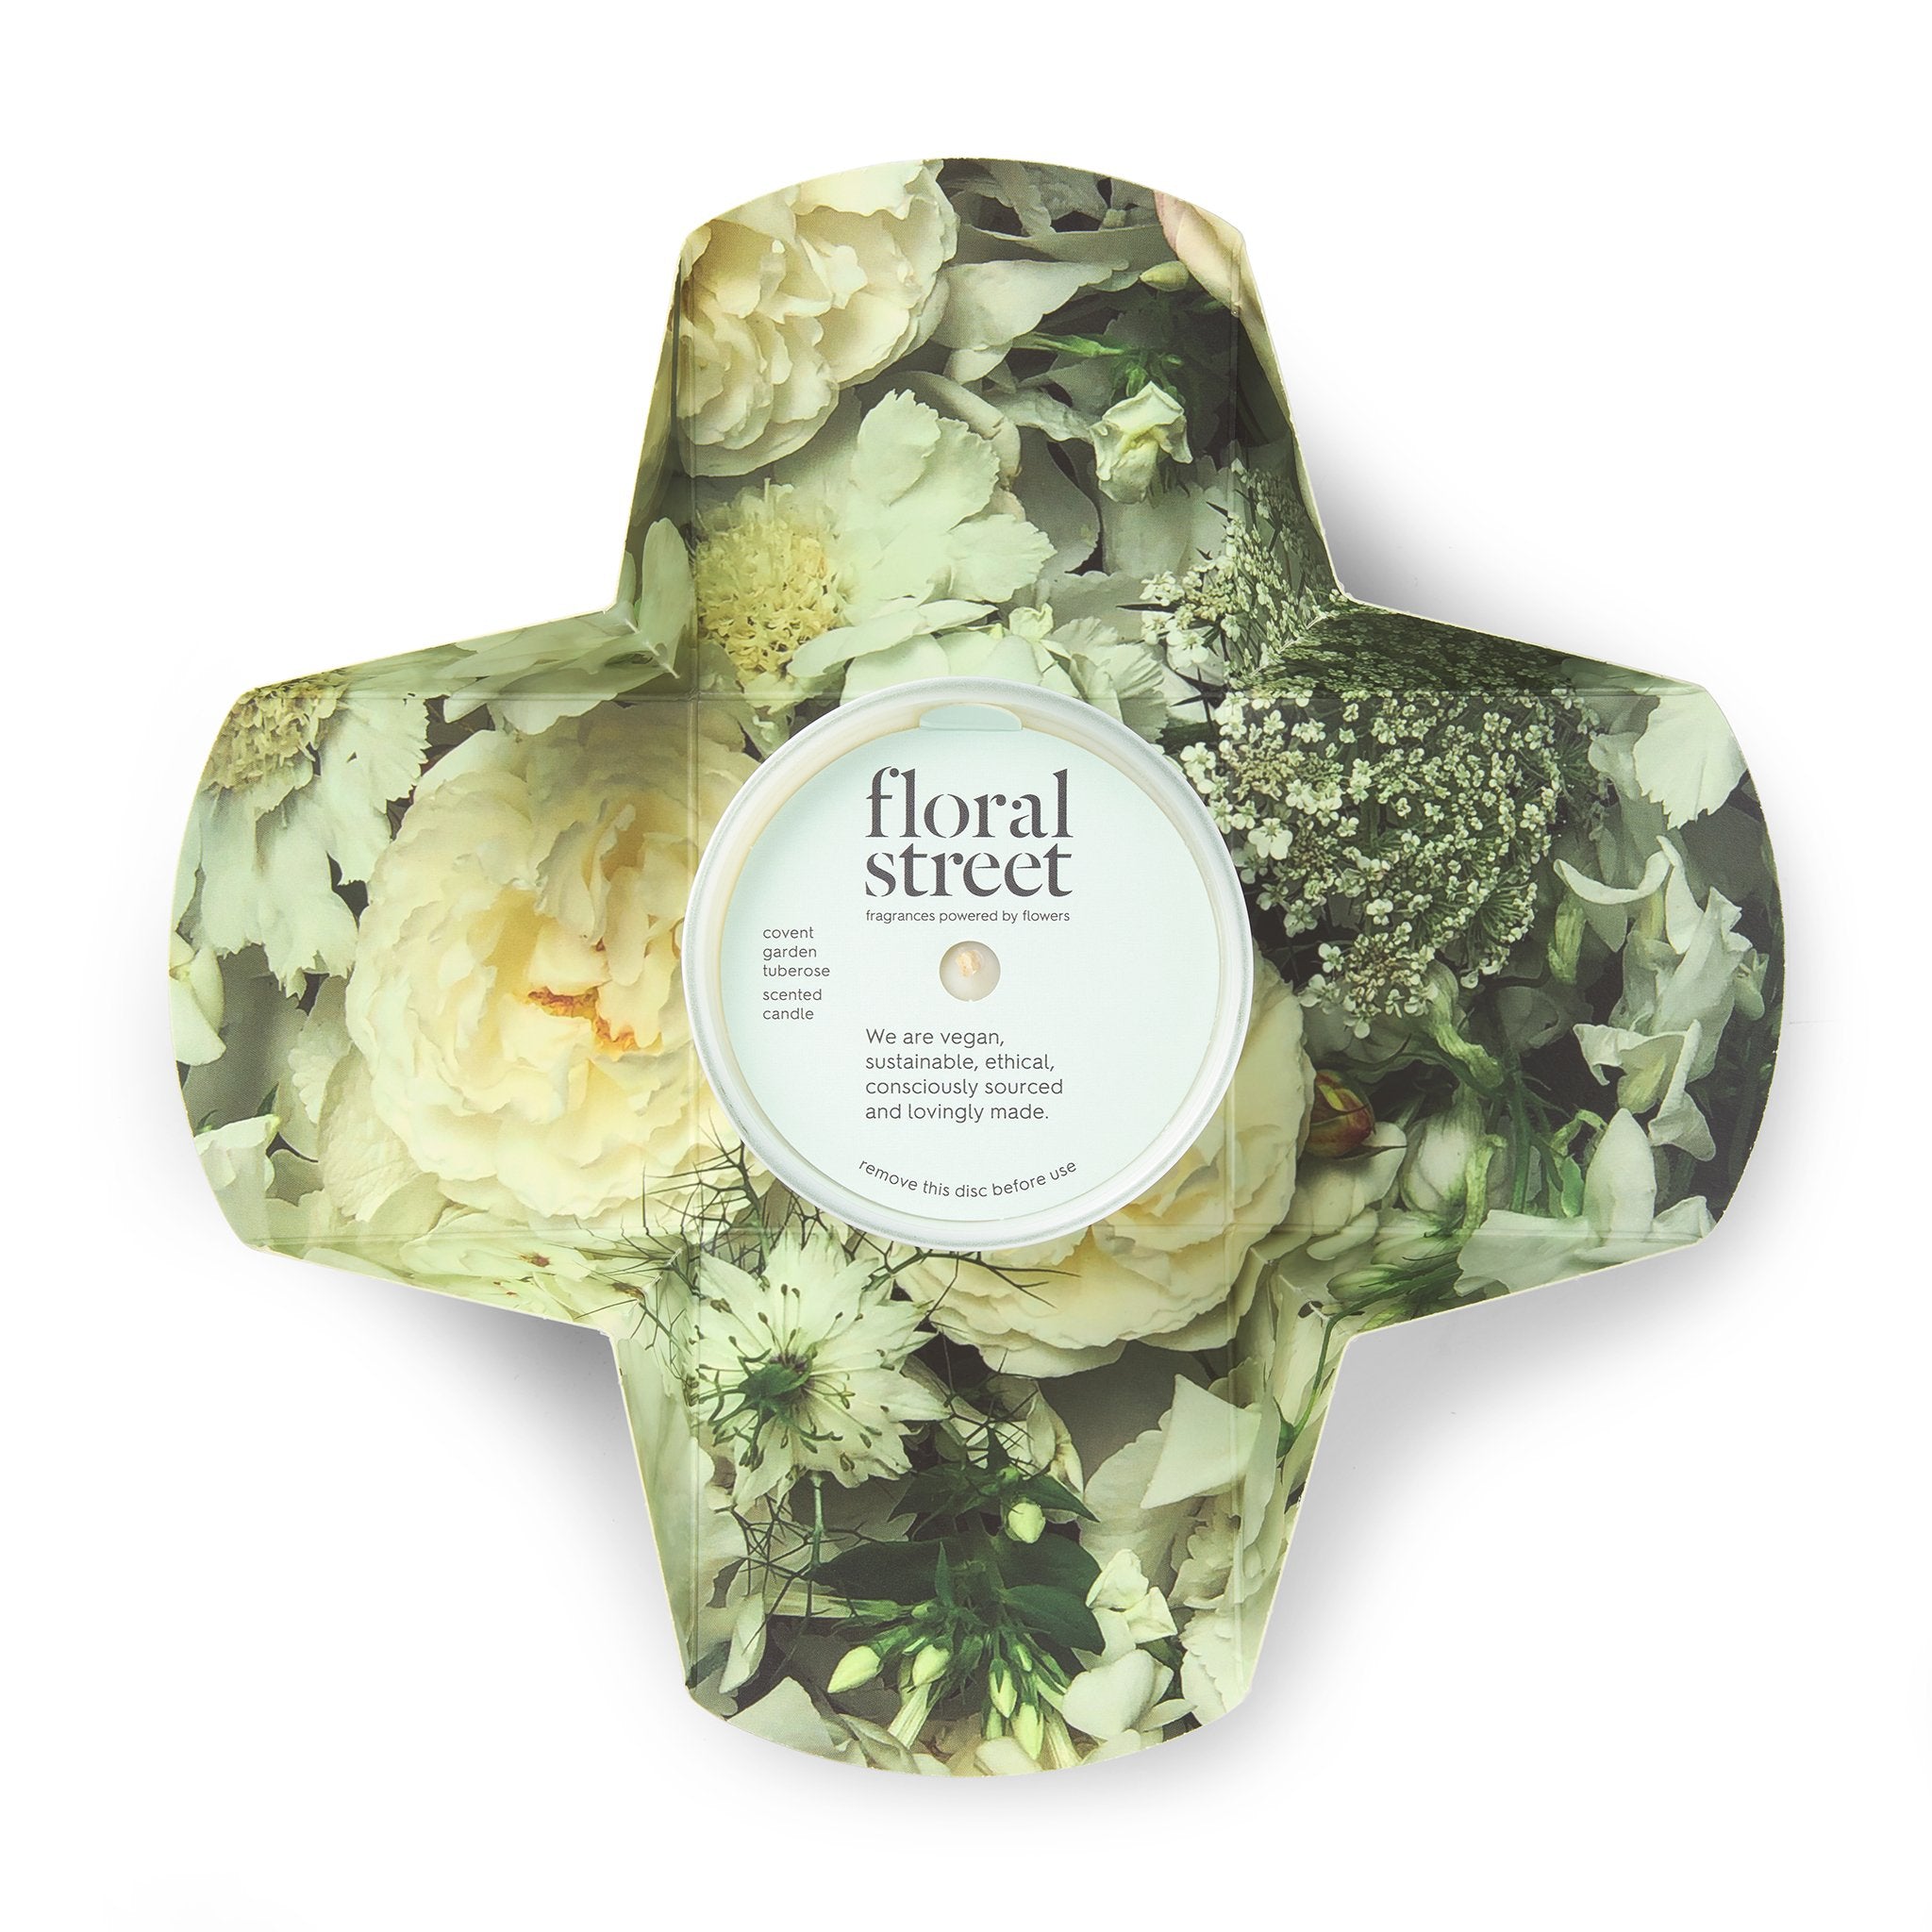 covent garden tuberose candle